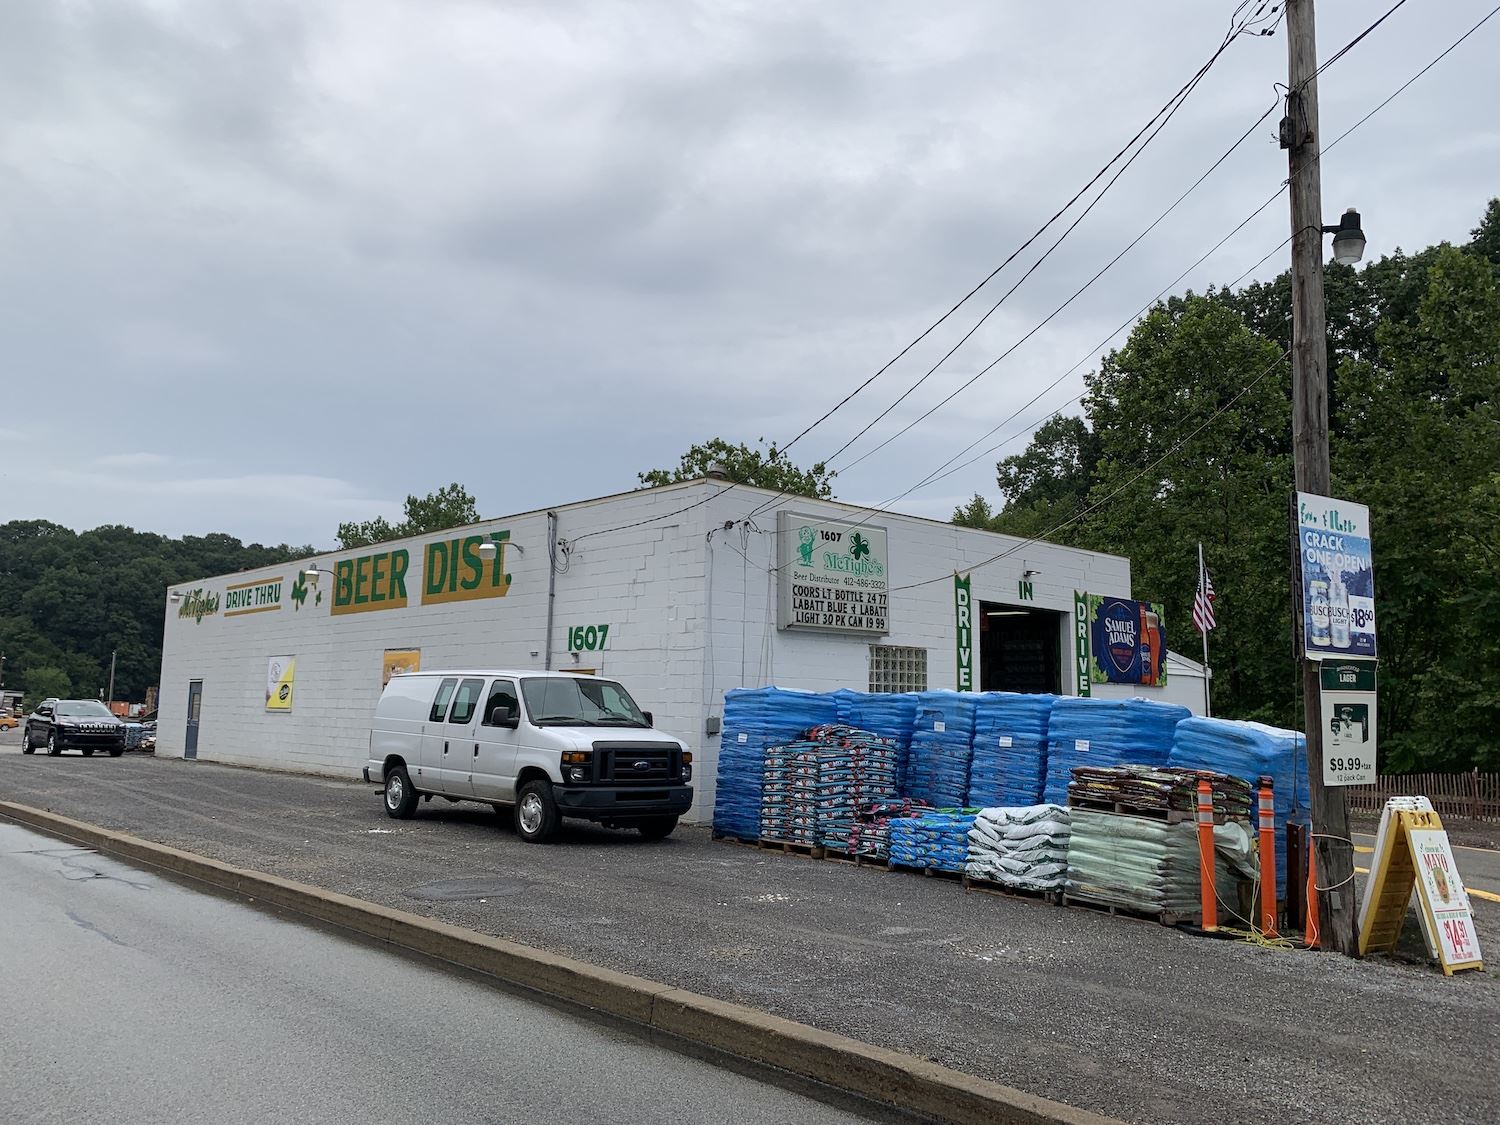 McTighe’s beer distributor, Glenshaw, Pennsylvania, August 2021. Photo by David S. Rotenstein.